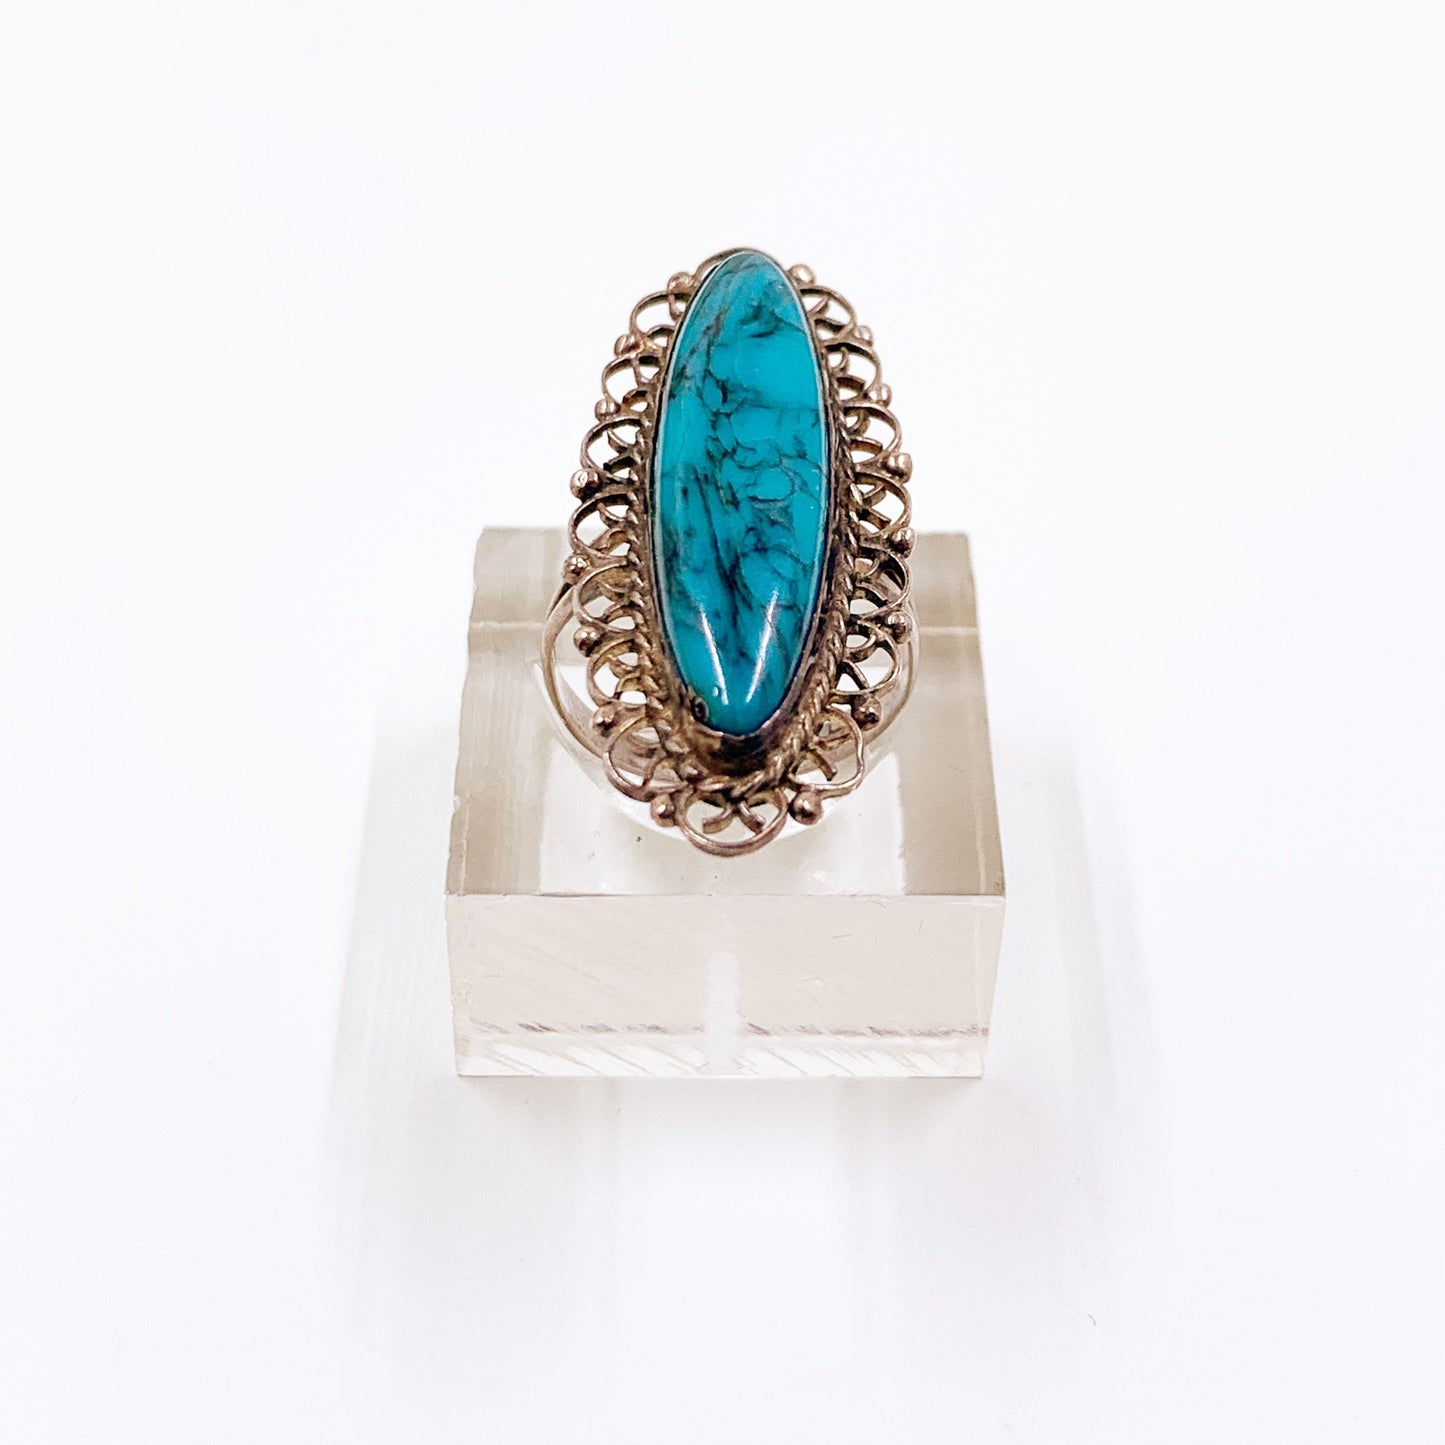 Vintage Silver Faux Turquoise Navette Ring | Size 5 Ring